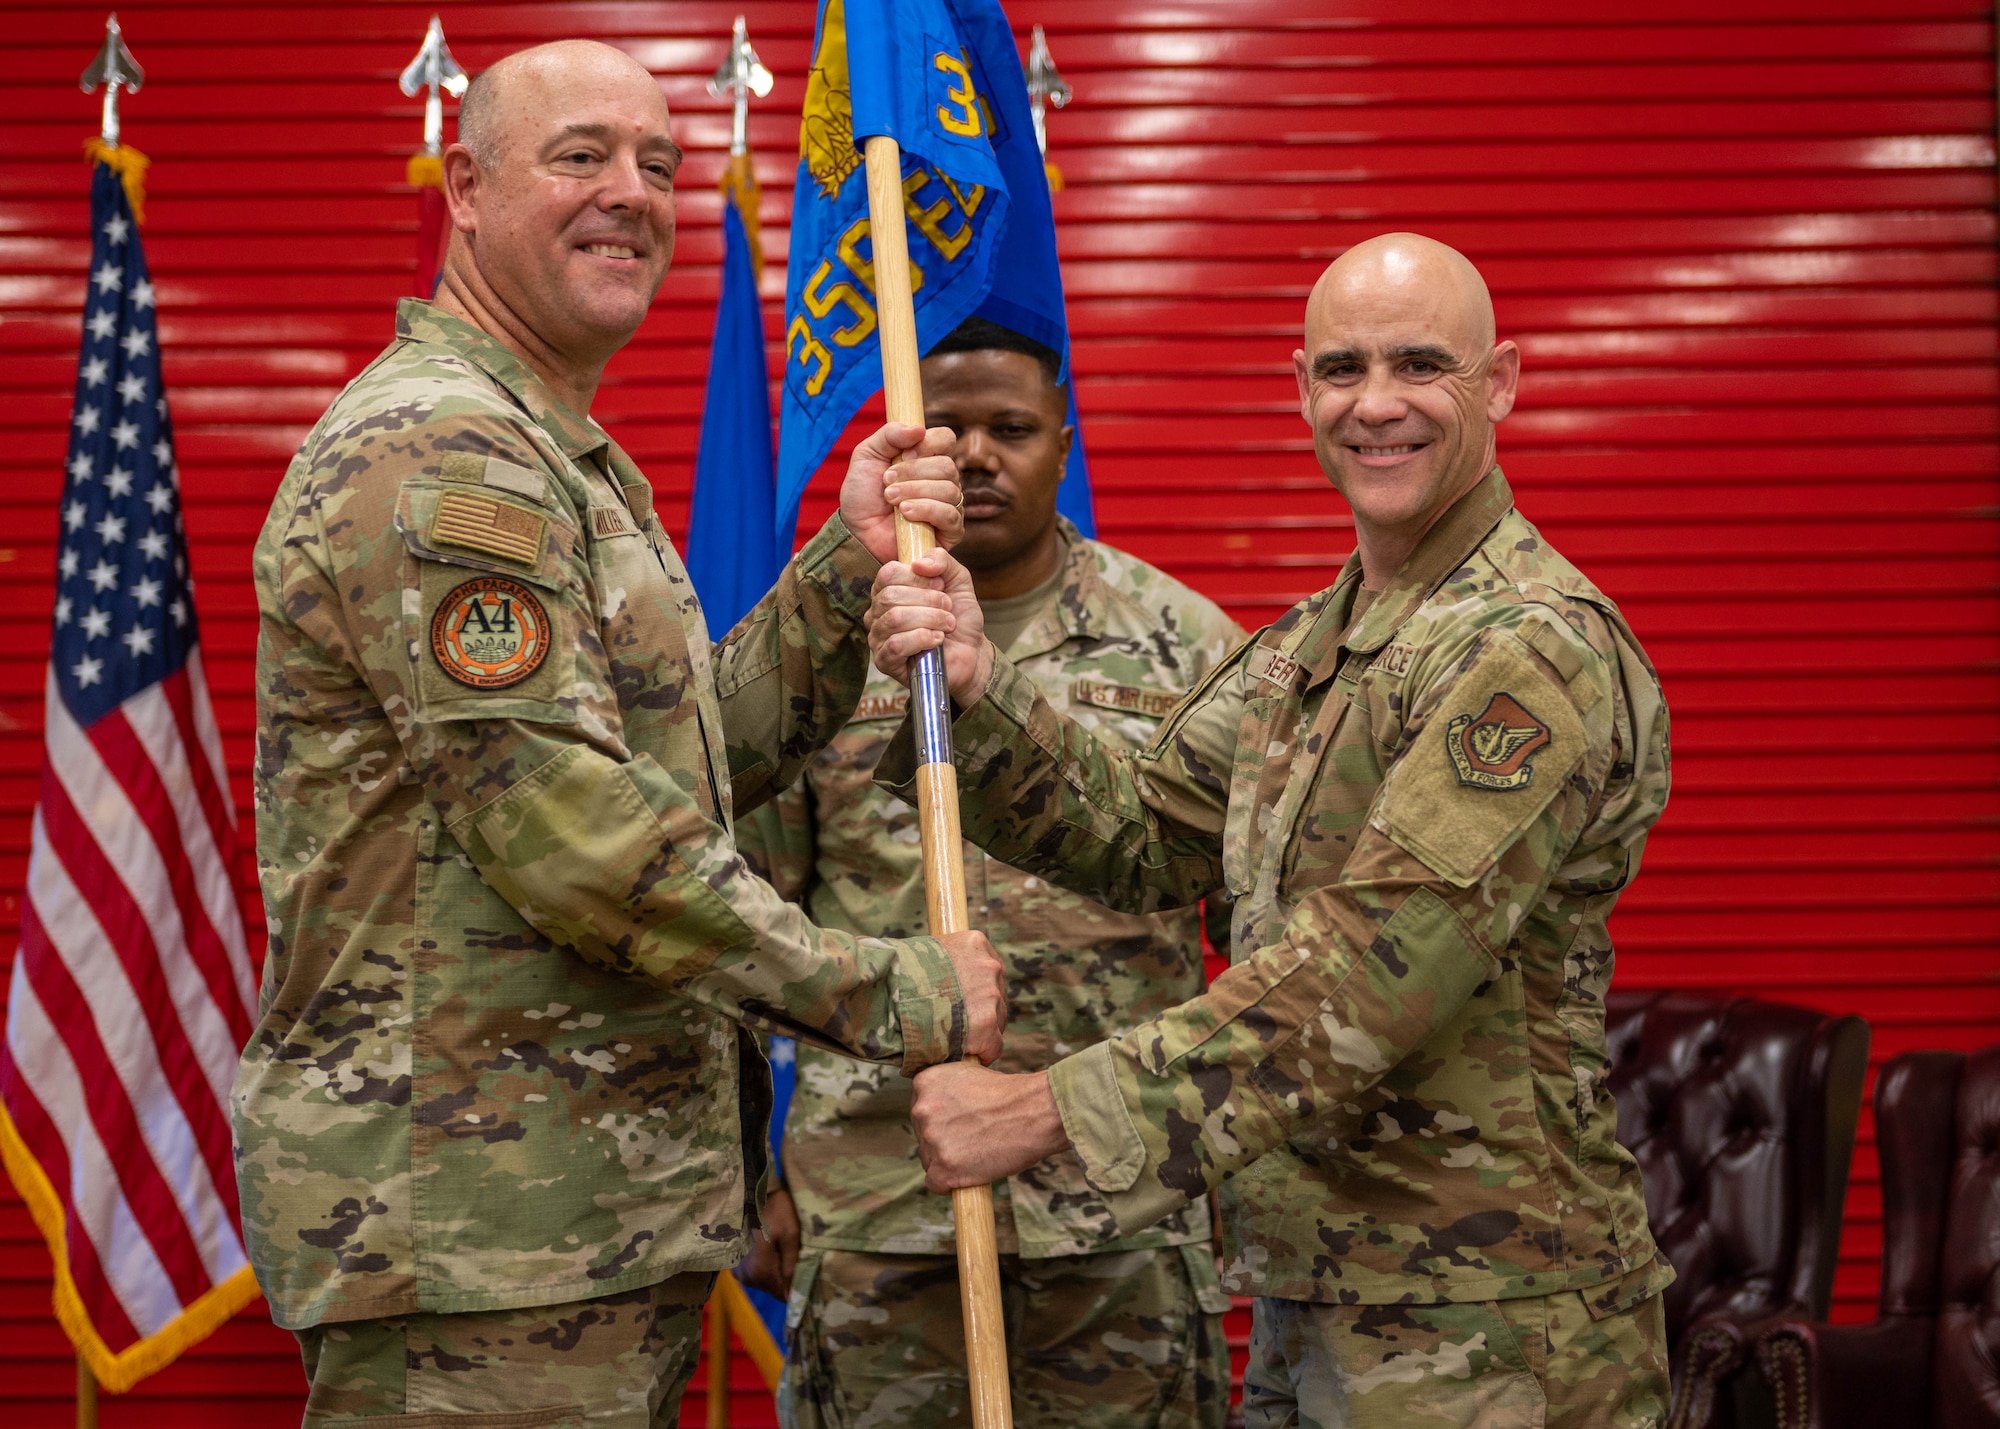 U.S. Air Force Col. Adam Roberts, commander of the 356th Expeditionary Civil Engineer Group, receives the guidon from Brig. Gen. Patrick G. Miller, director of logistics, engineering and force protection, headquarters Pacific Air Forces, Joint Base Pearl Harbor Hickam, Hawaii, at the Pacific Regional Training Center - Andersen, Guam,  Oct. 20, 2023. Roberts is now responsible for leading the 356th ECEG. (U.S. Air Force photo by Airman Allon Lapaix)